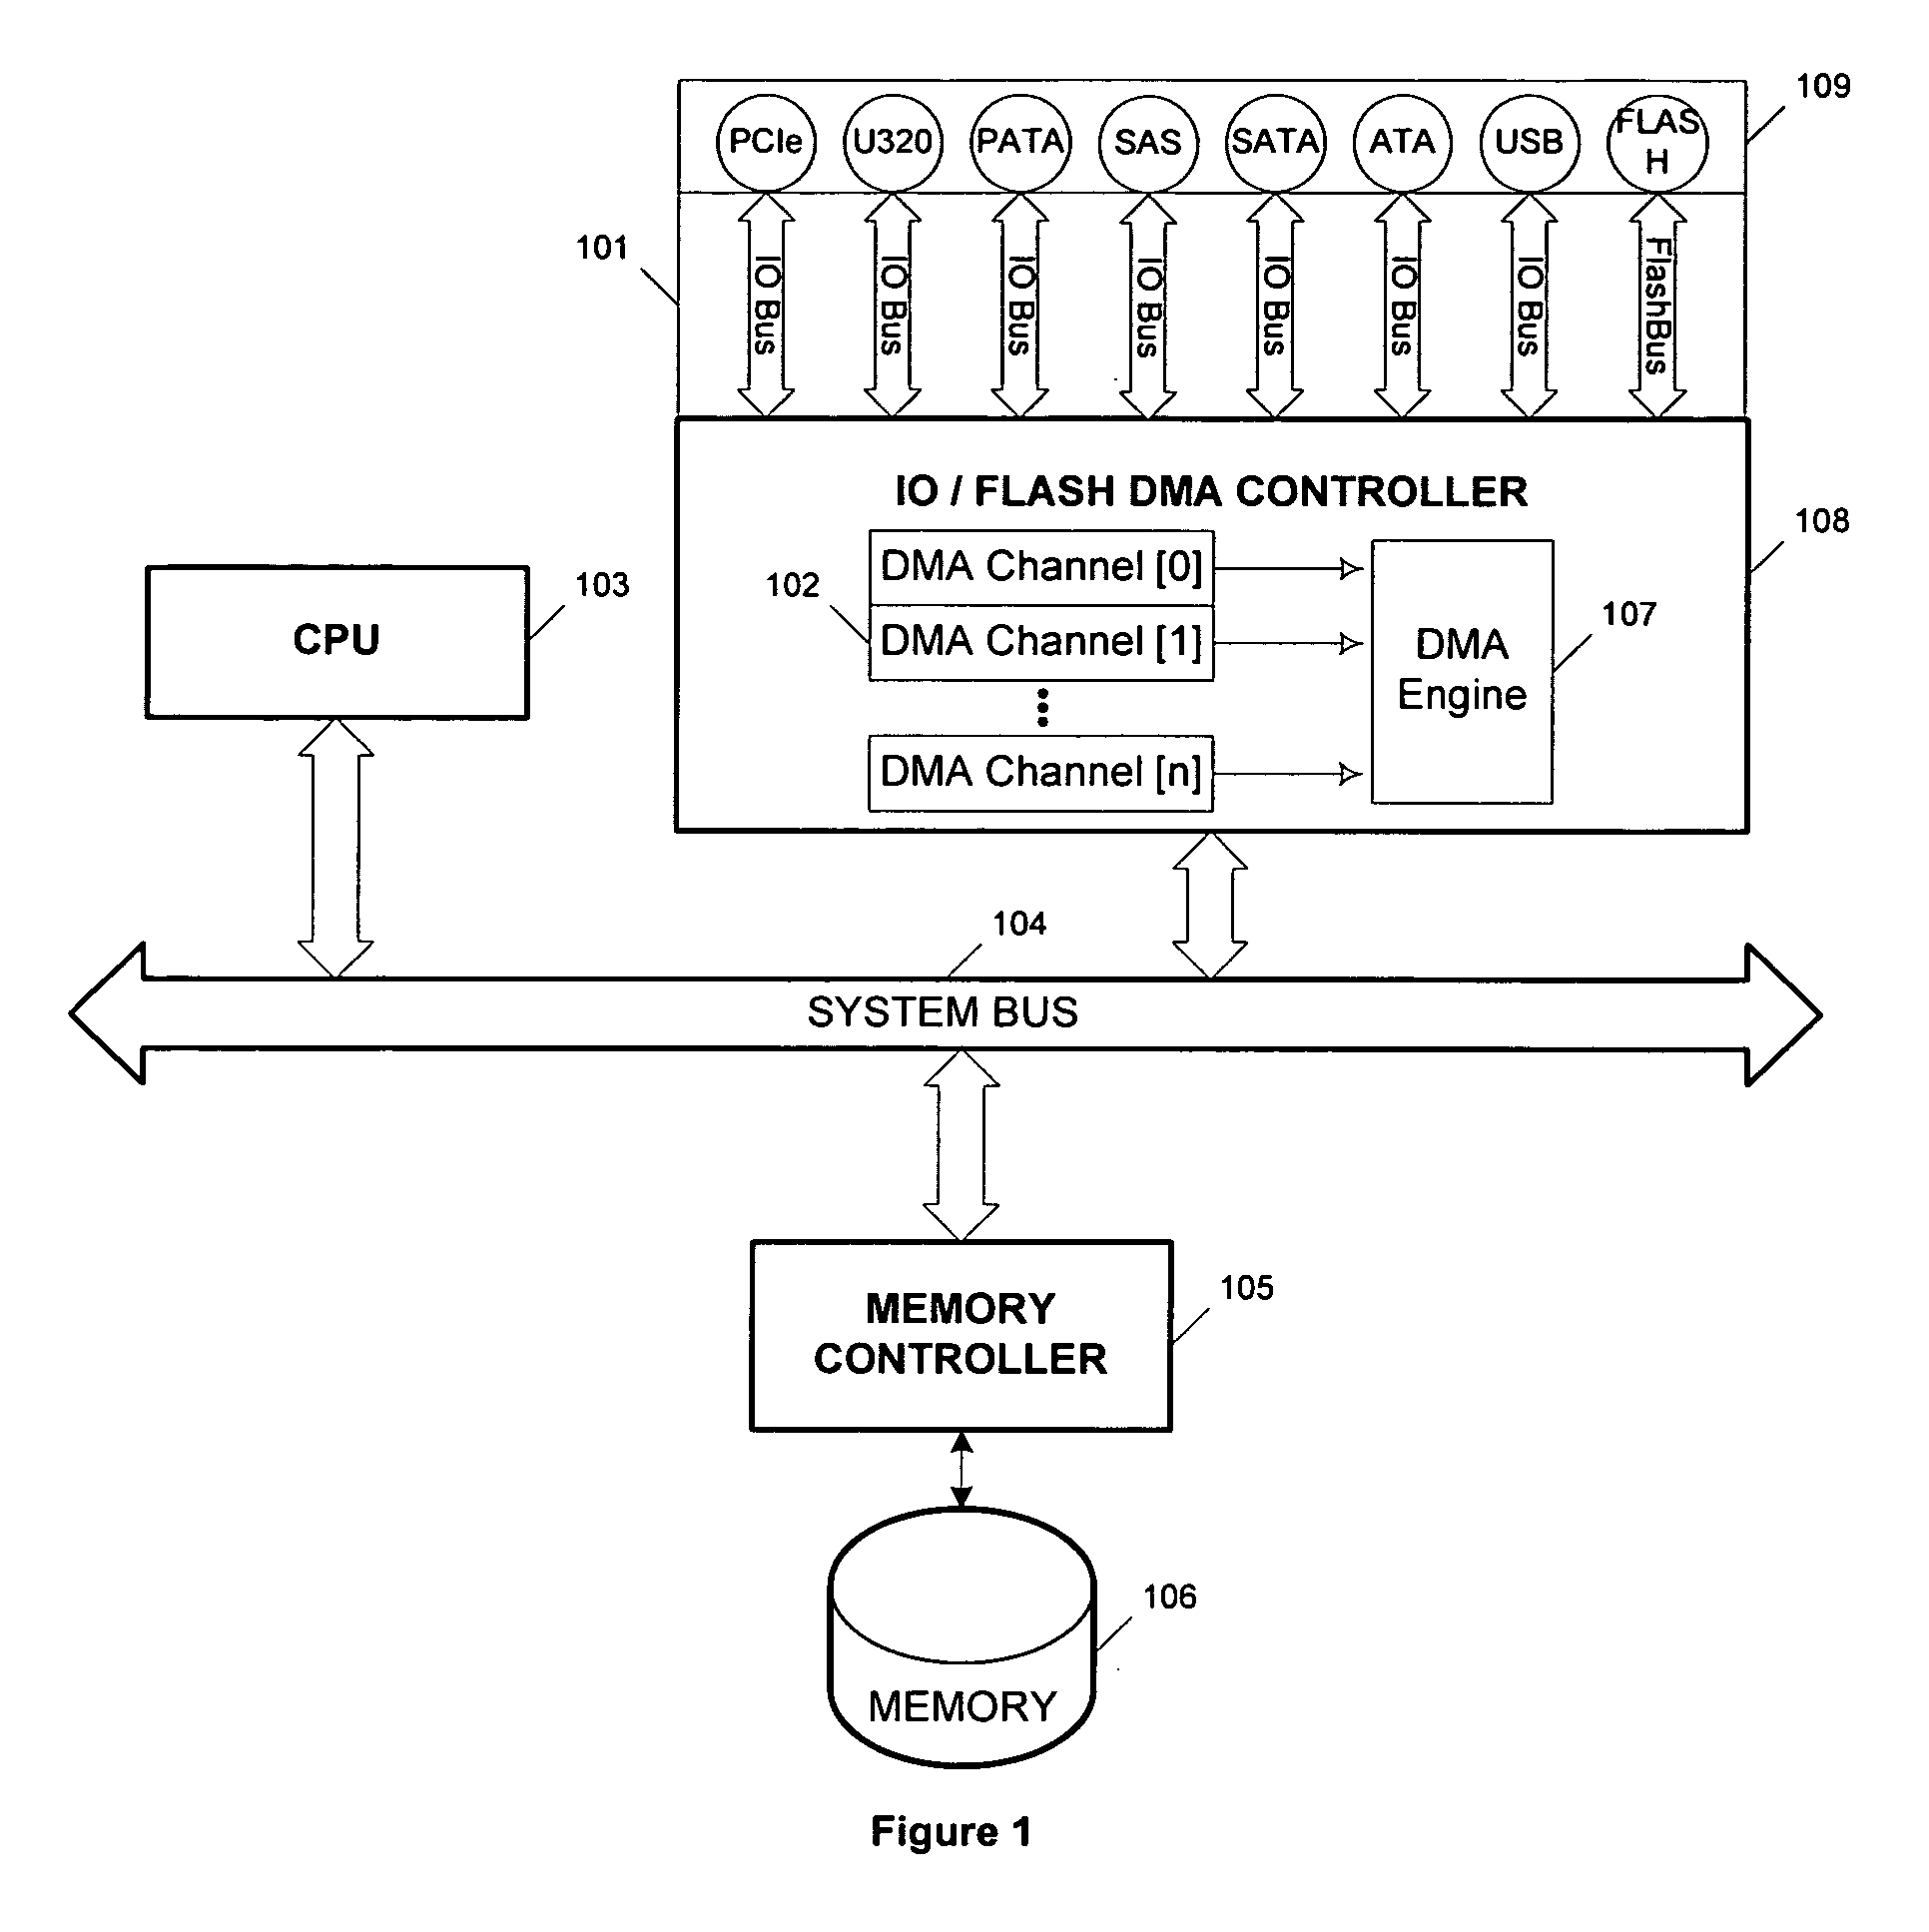 Direct memory access controller with encryption and decryption for non-blocking high bandwidth I/O transactions